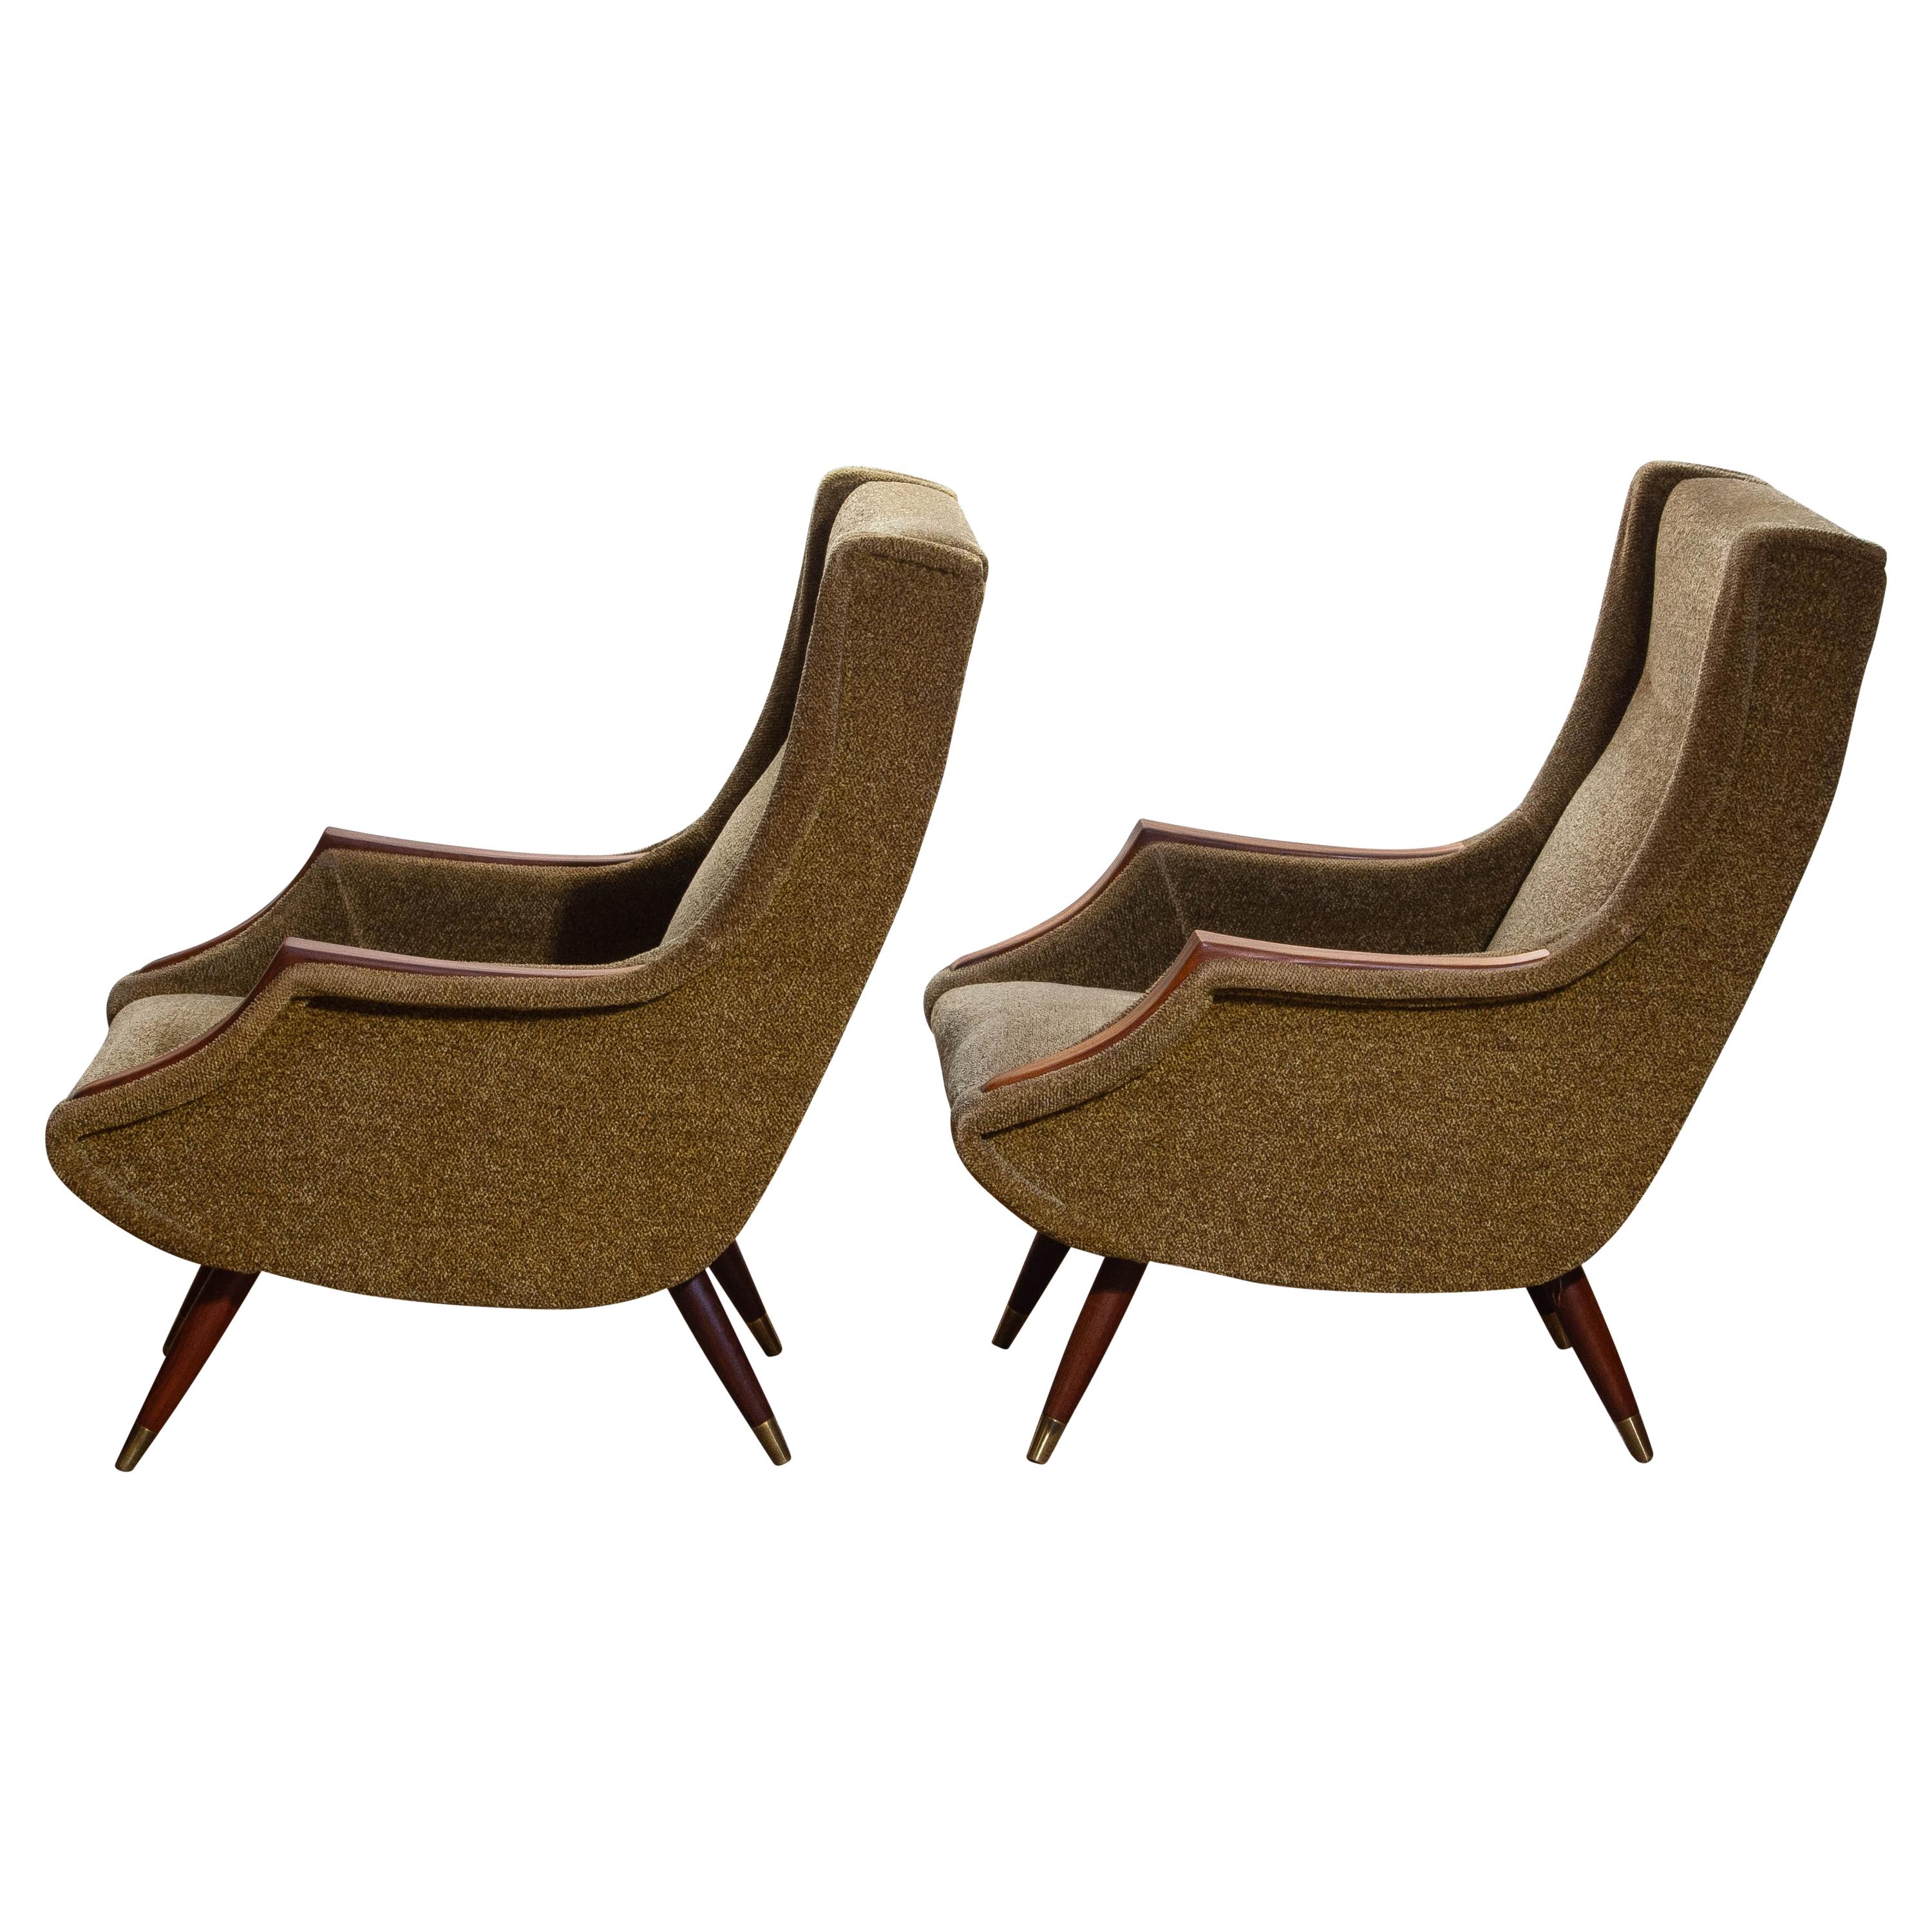 Mid-Century Modern 1950s, Set of Lounge Easy Club Chairs by Aldo Morbelli for Isa Bergamo, Italy